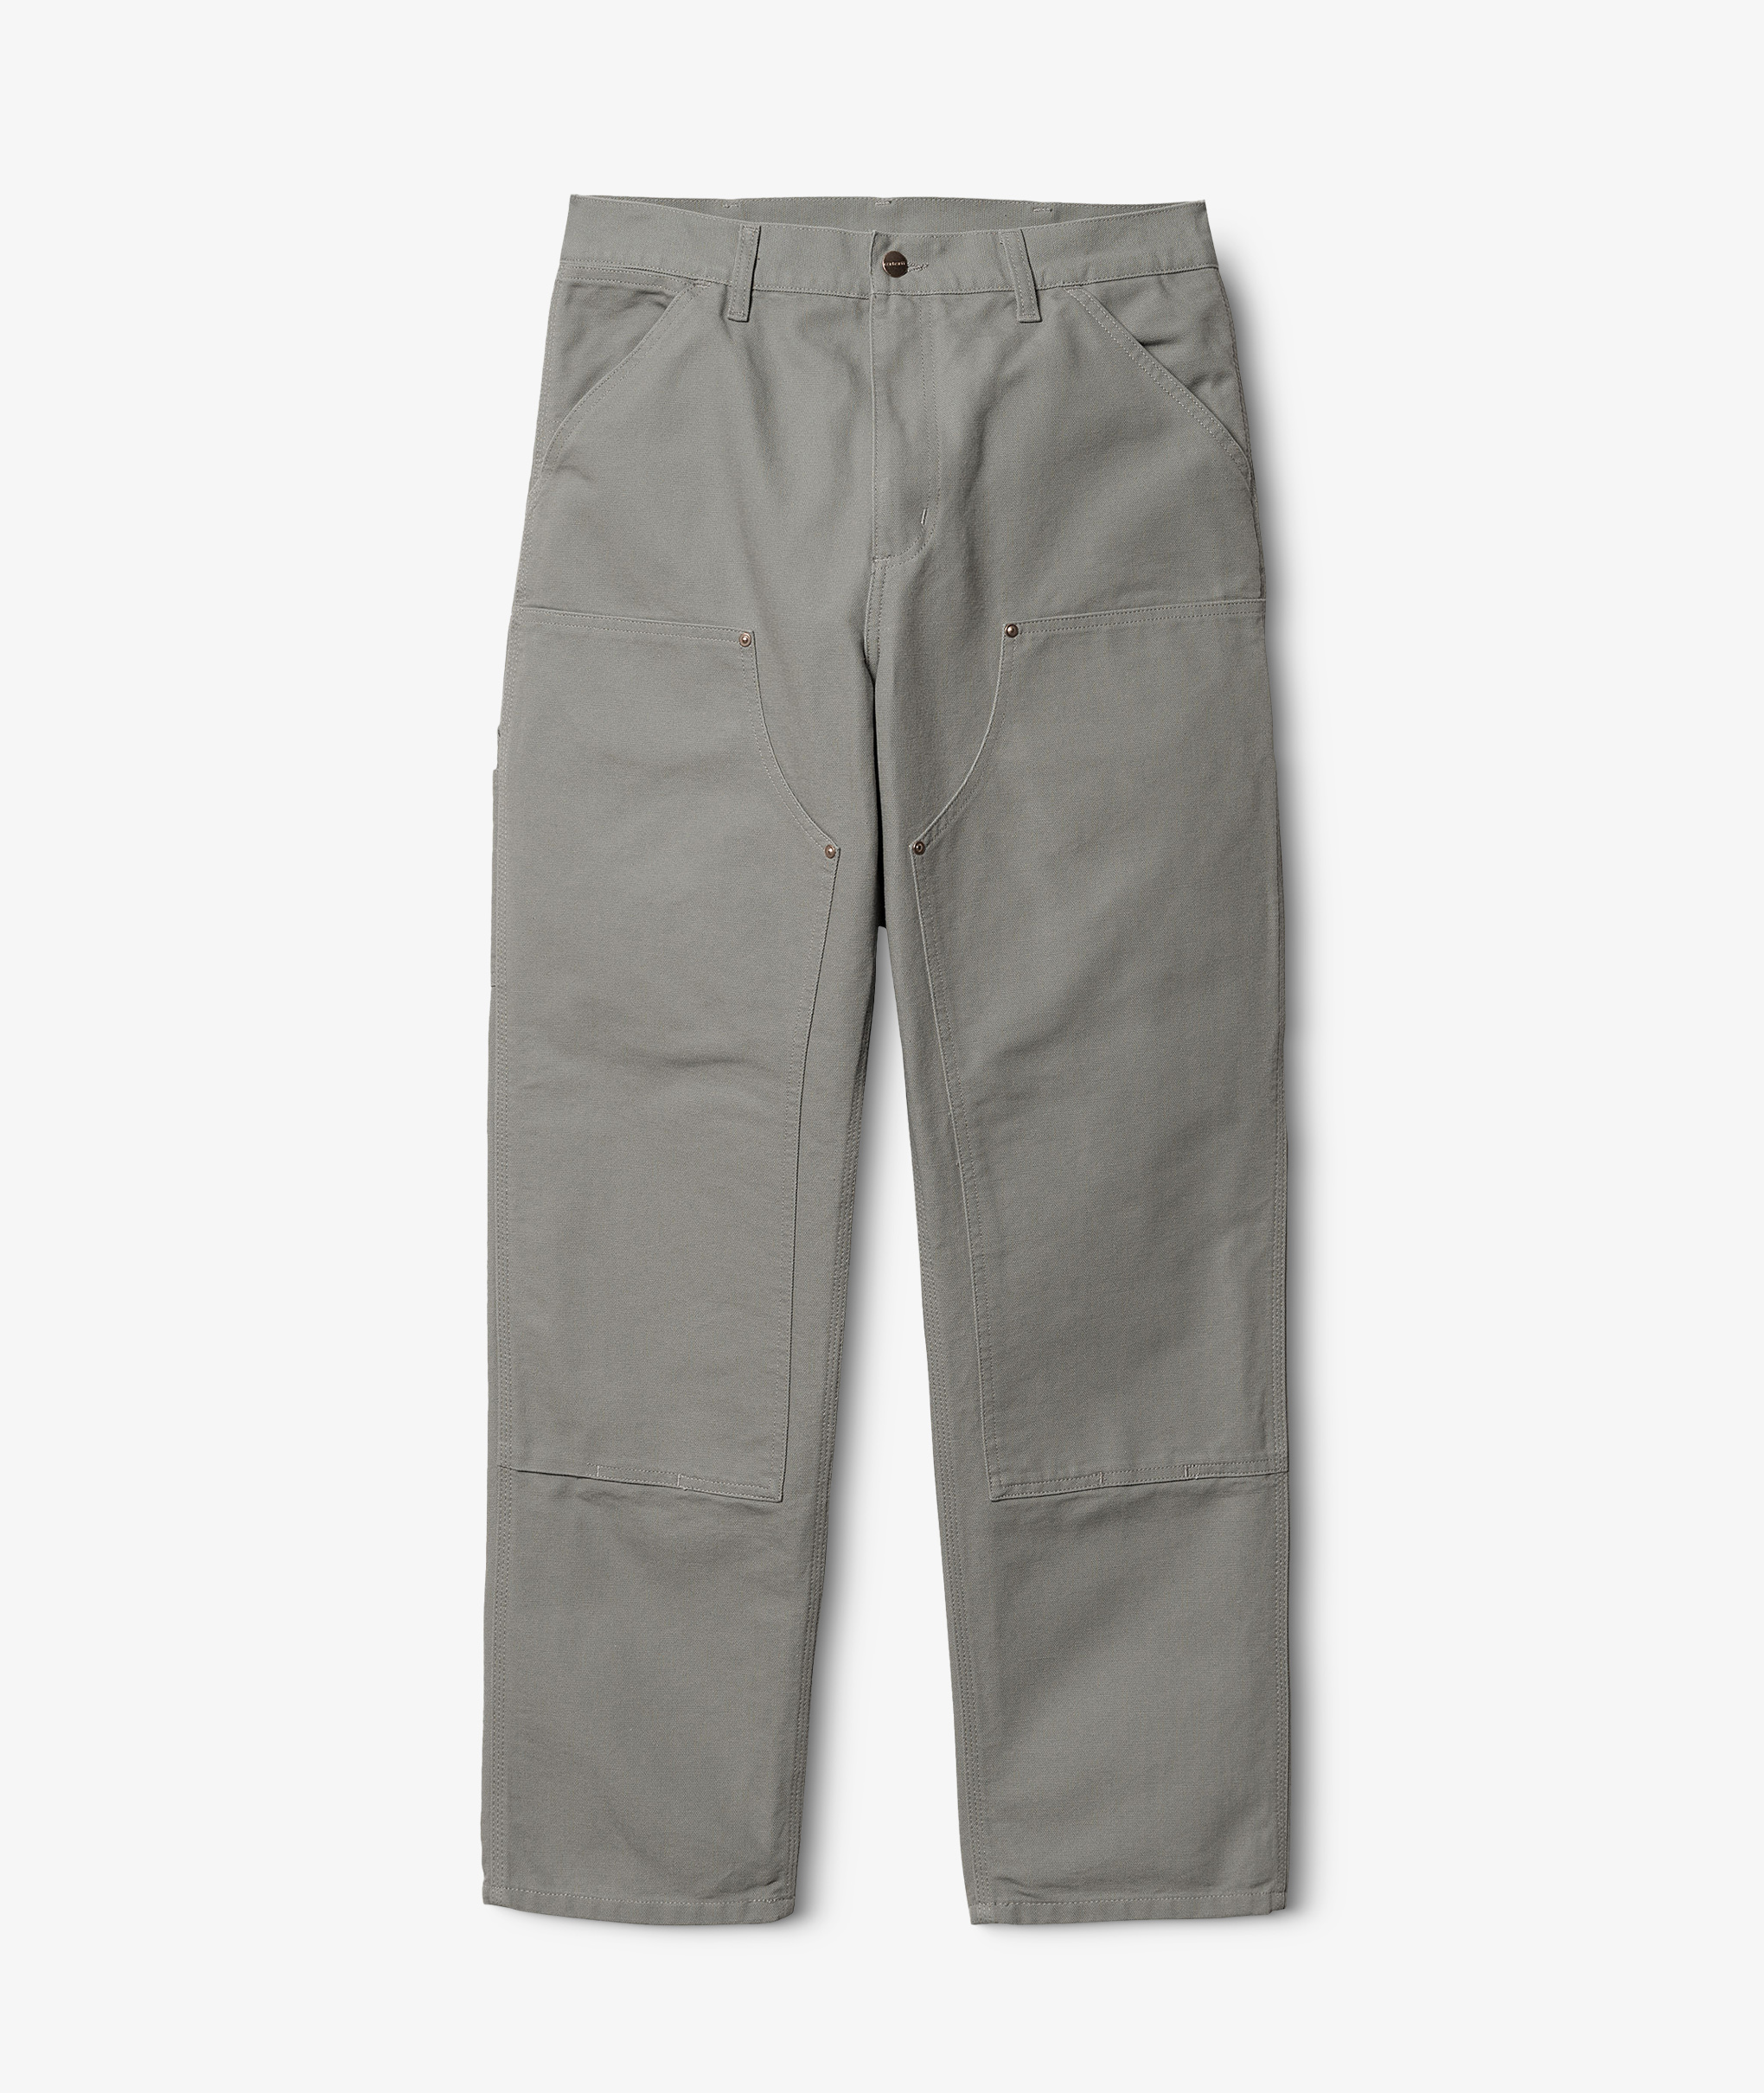 Norse Store | Shipping Worldwide - Carhartt WIP Double Knee Pant - Marengo